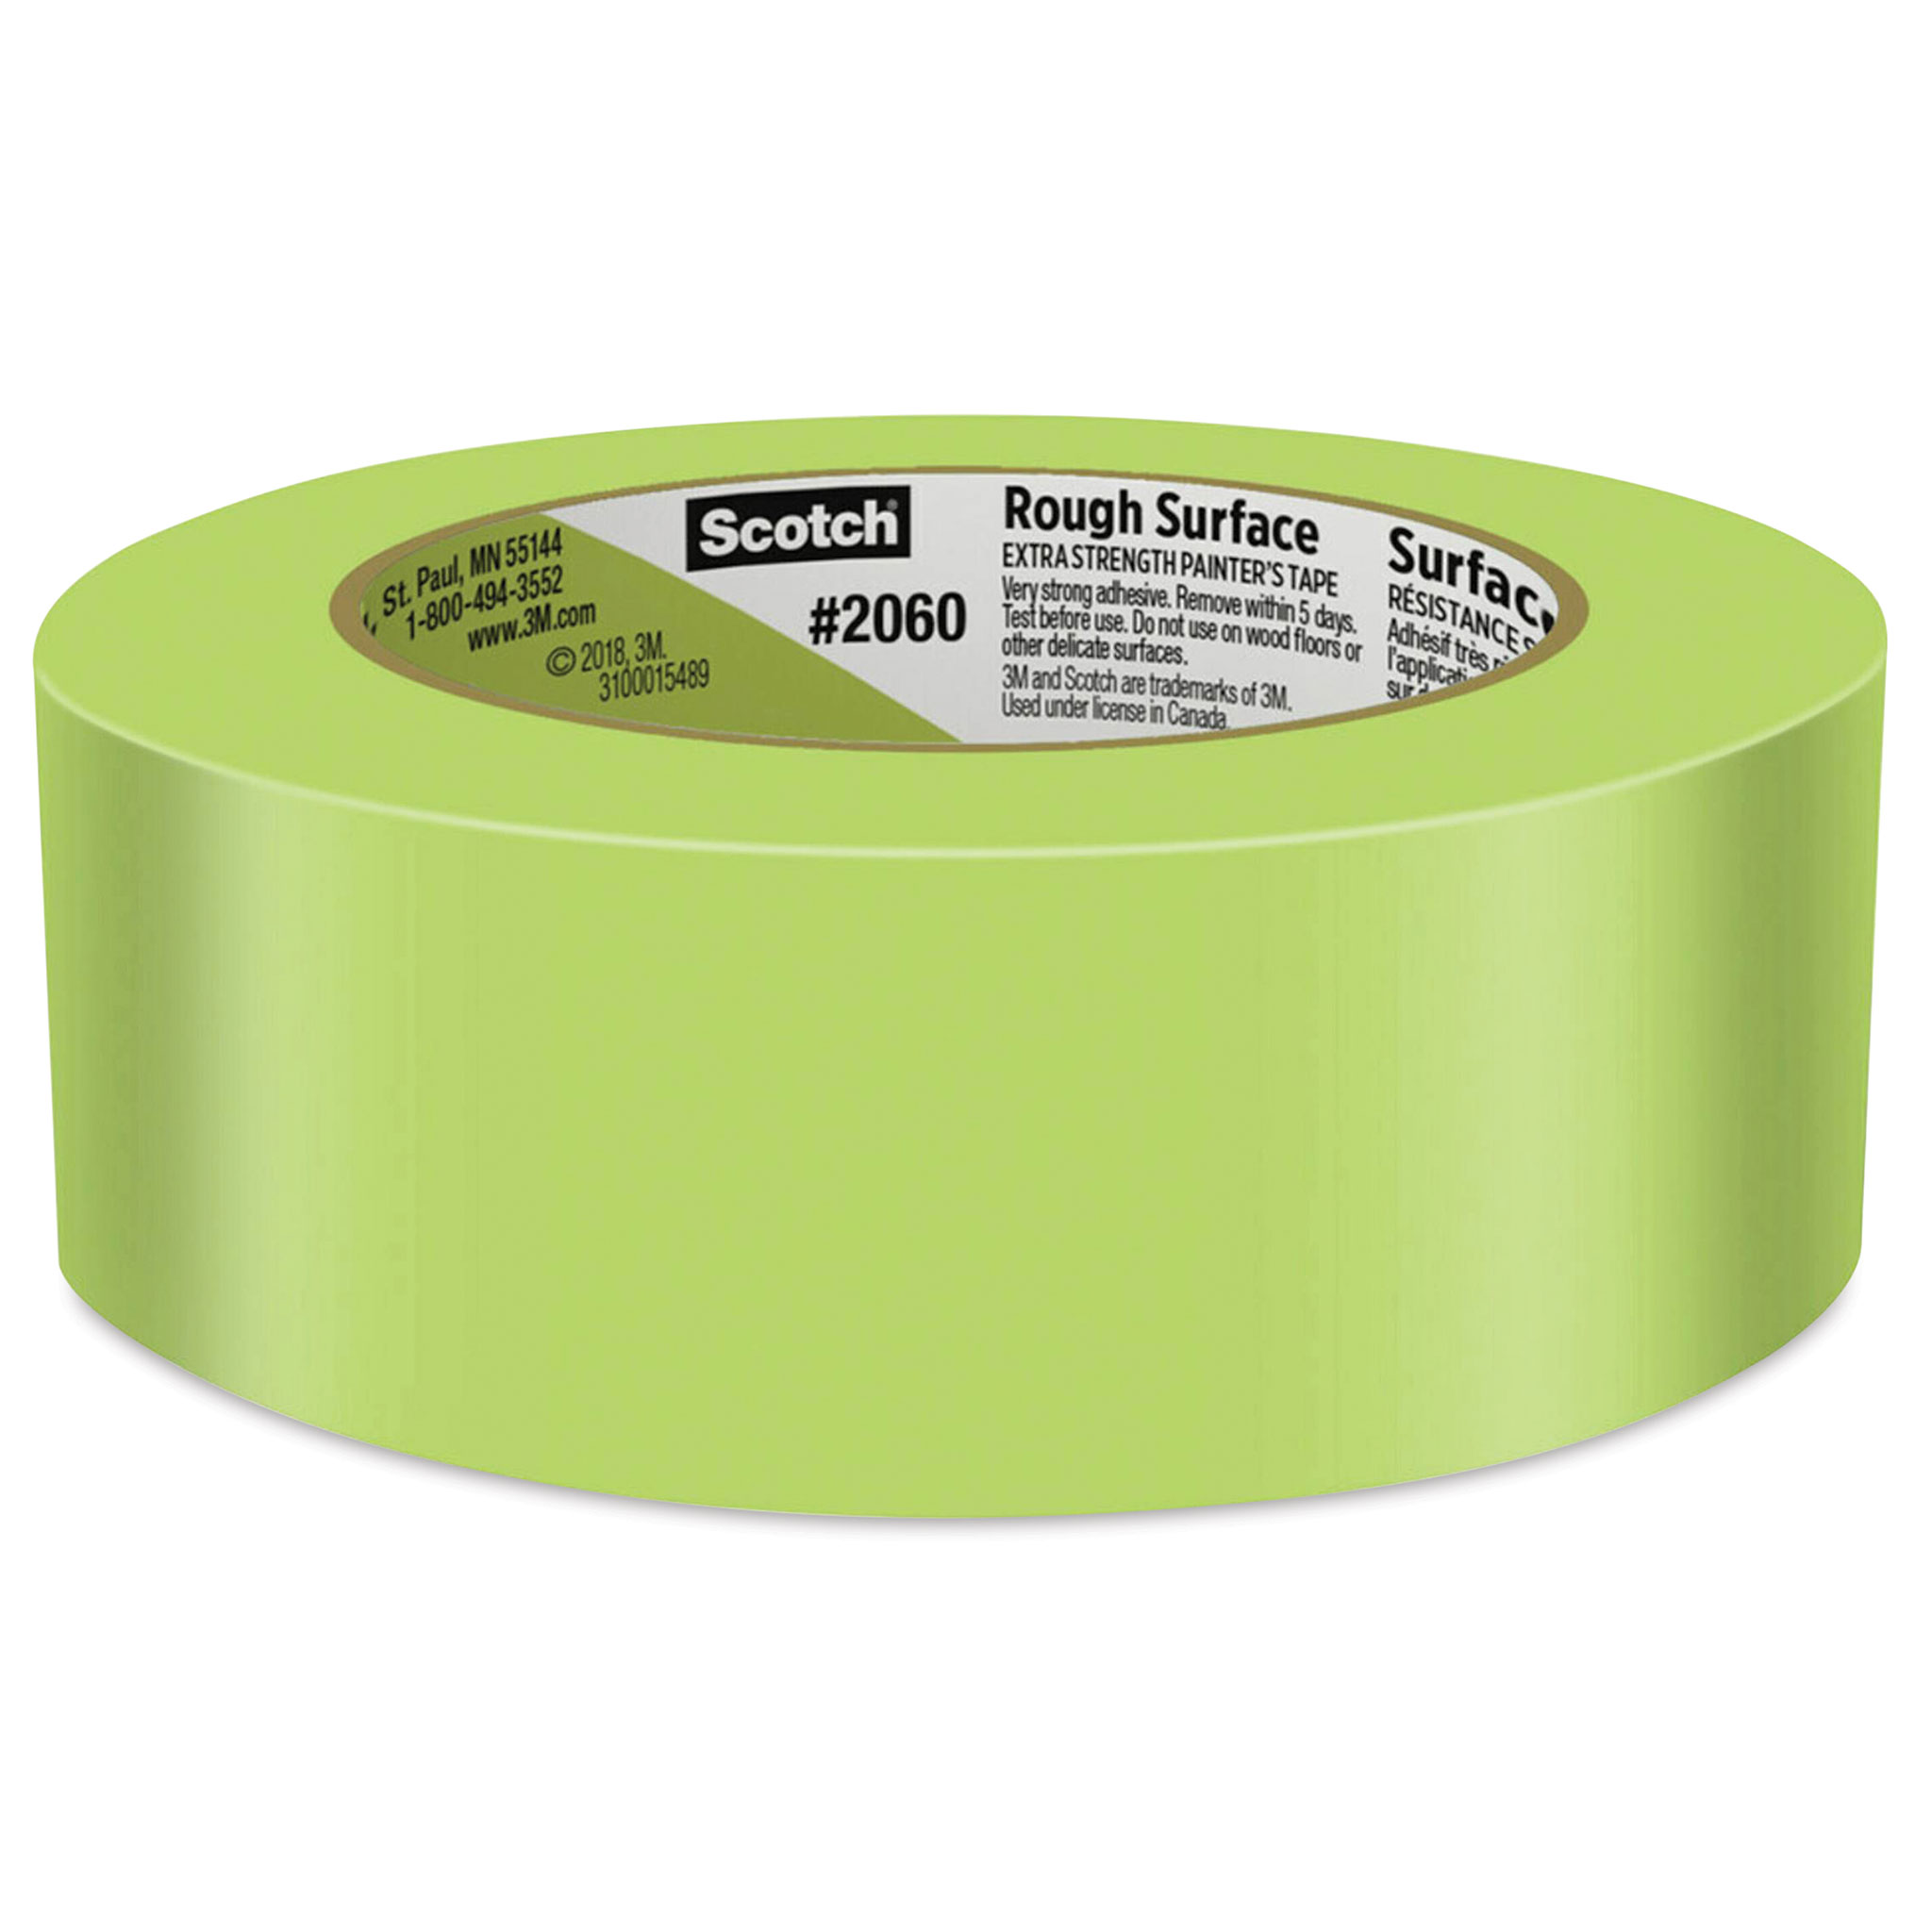 Repositionable Artist Tape Pro for Paper - Low Tack Masking Artists Tape  for